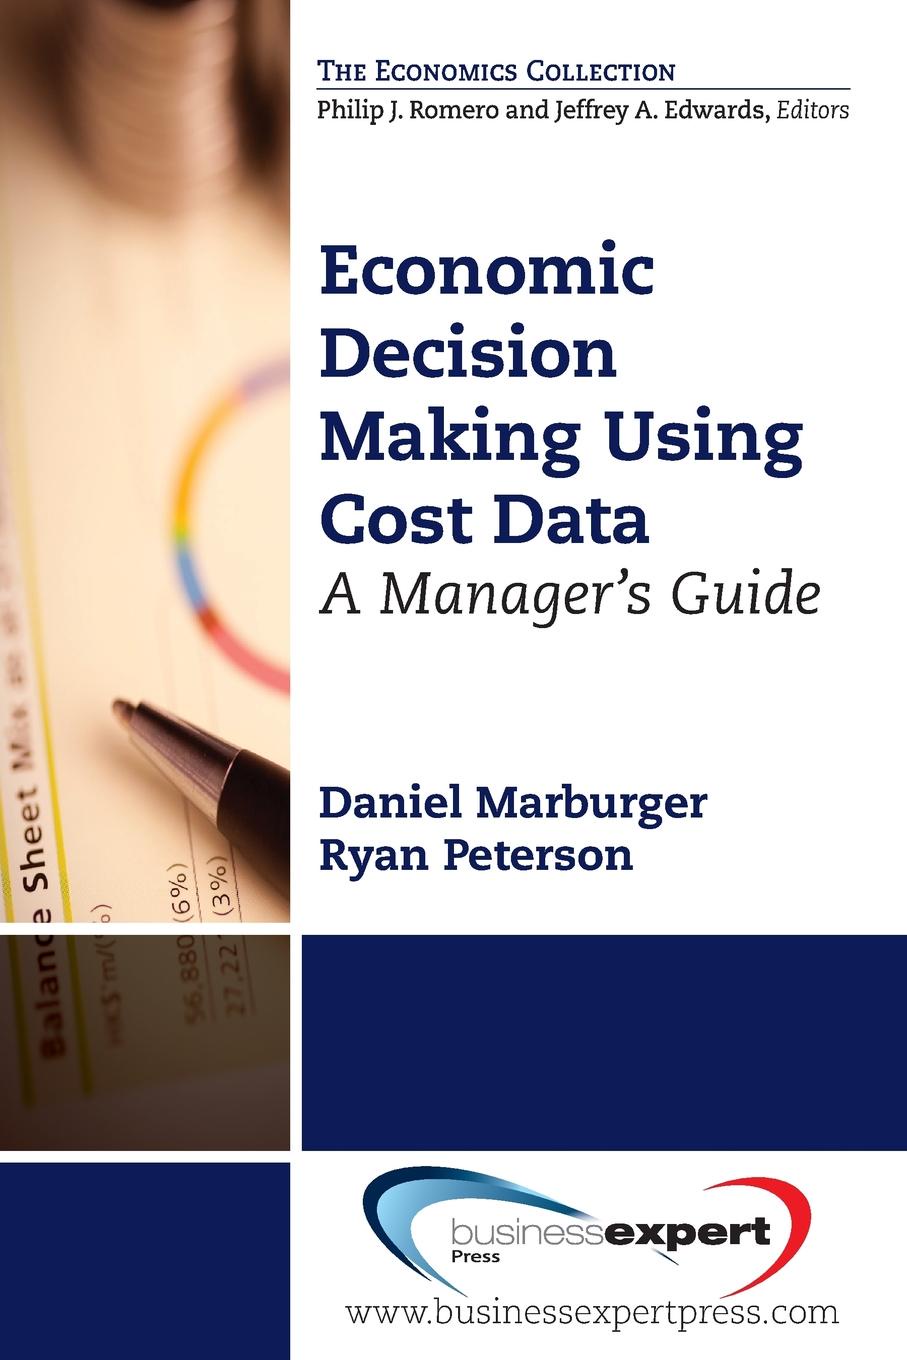 Economic Decision Making Using Cost Data. A Guide for Managers